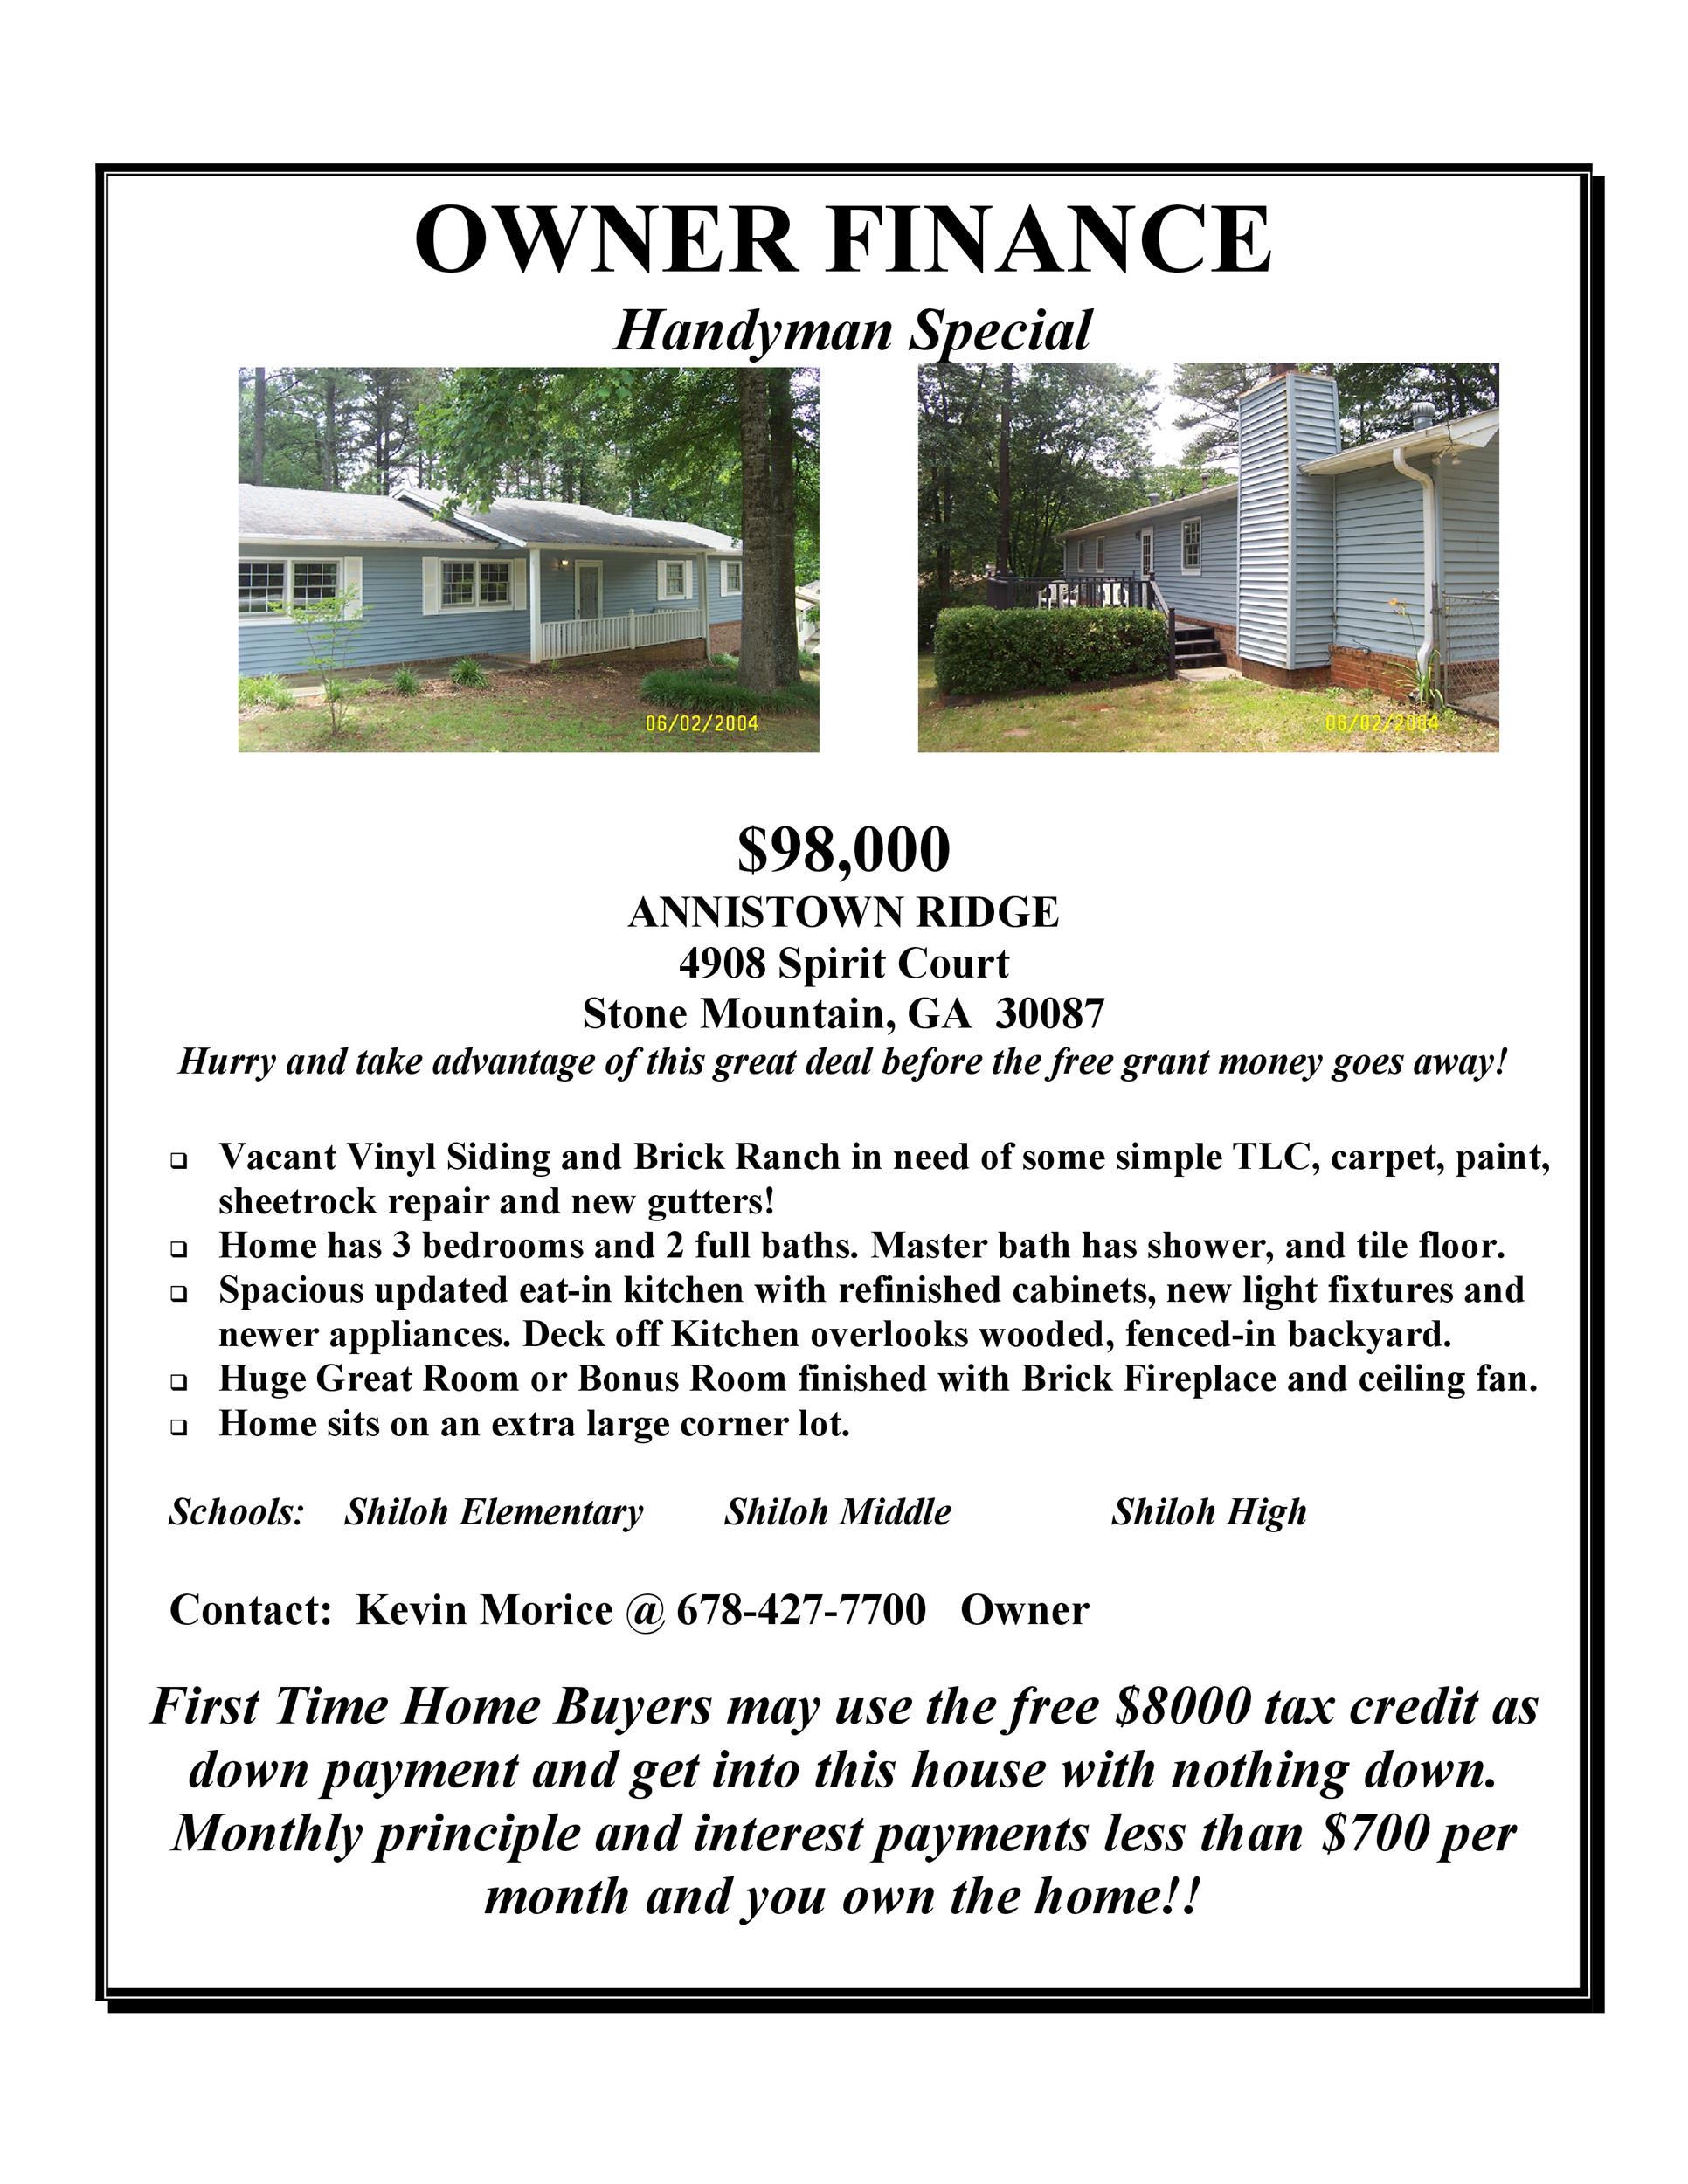 Free house for sale flyer 40